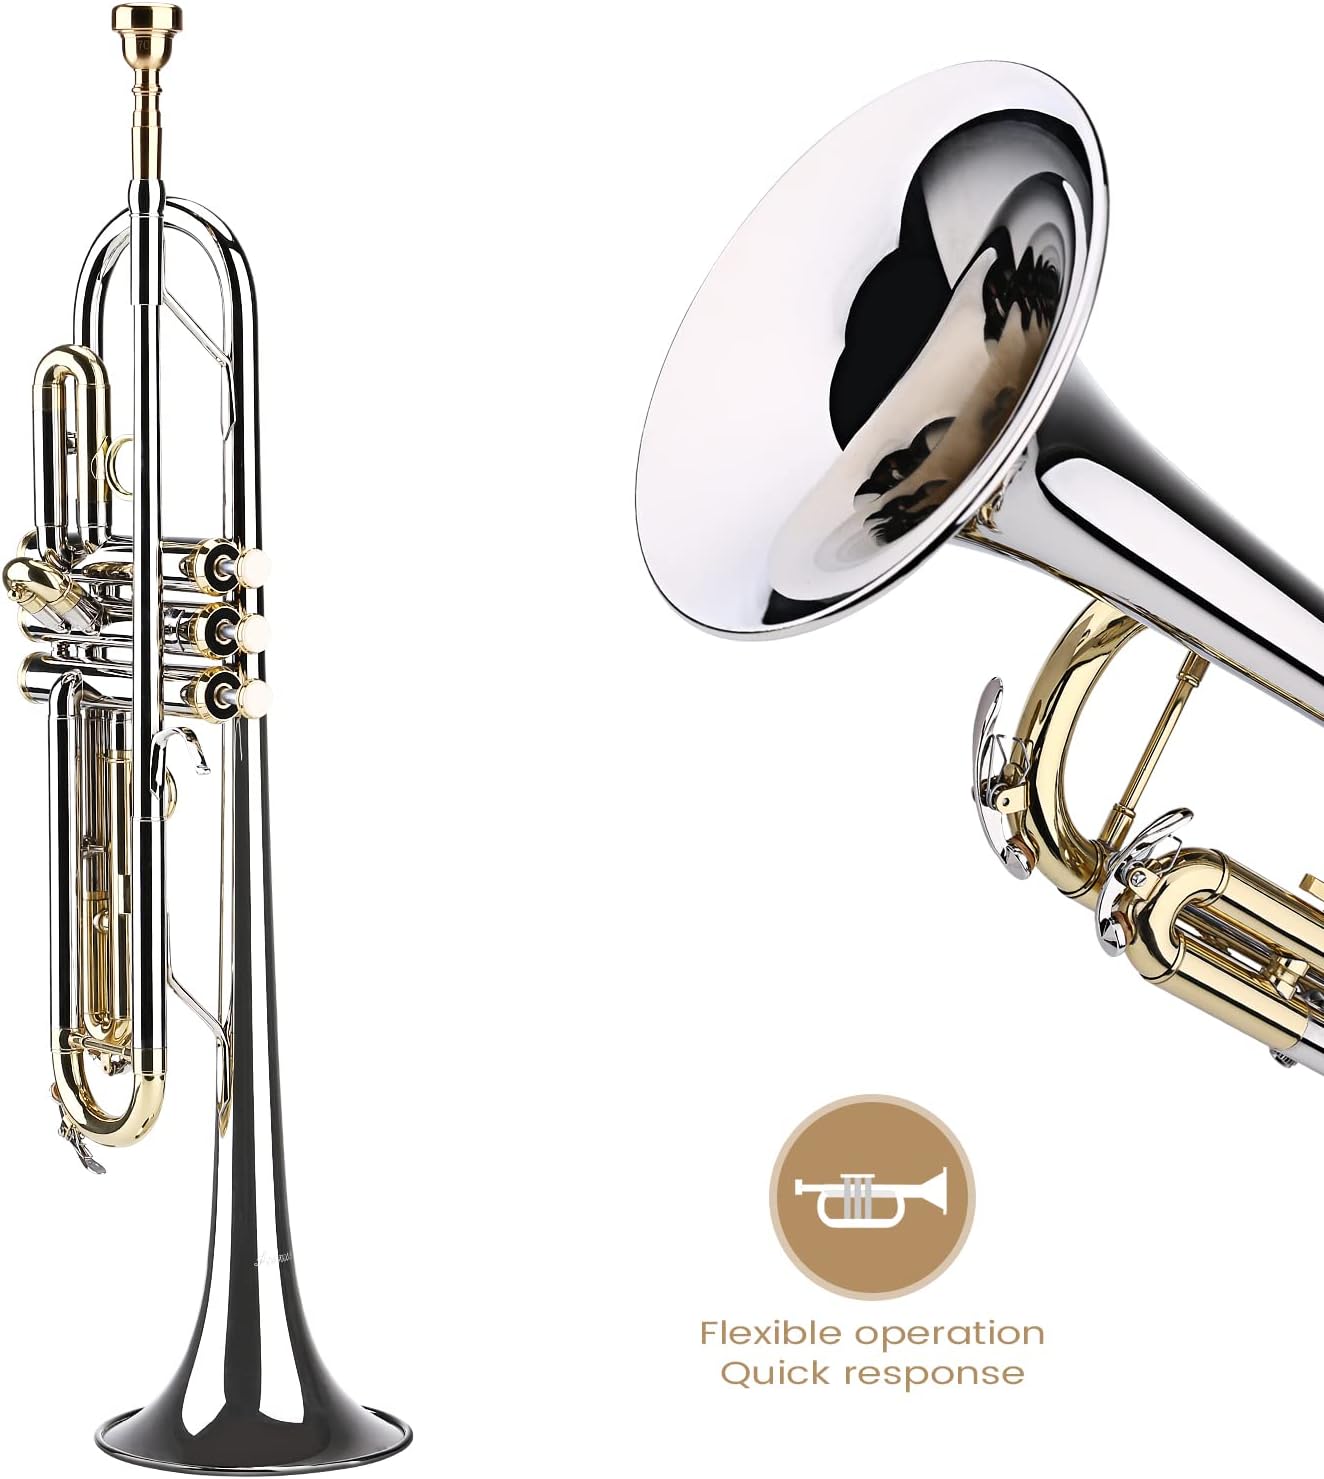 High-Quality Bb Trumpet with Black Nickel Gold Plating, Brass Material, B  Flat Musical Instrument with Case and Mouthpiece